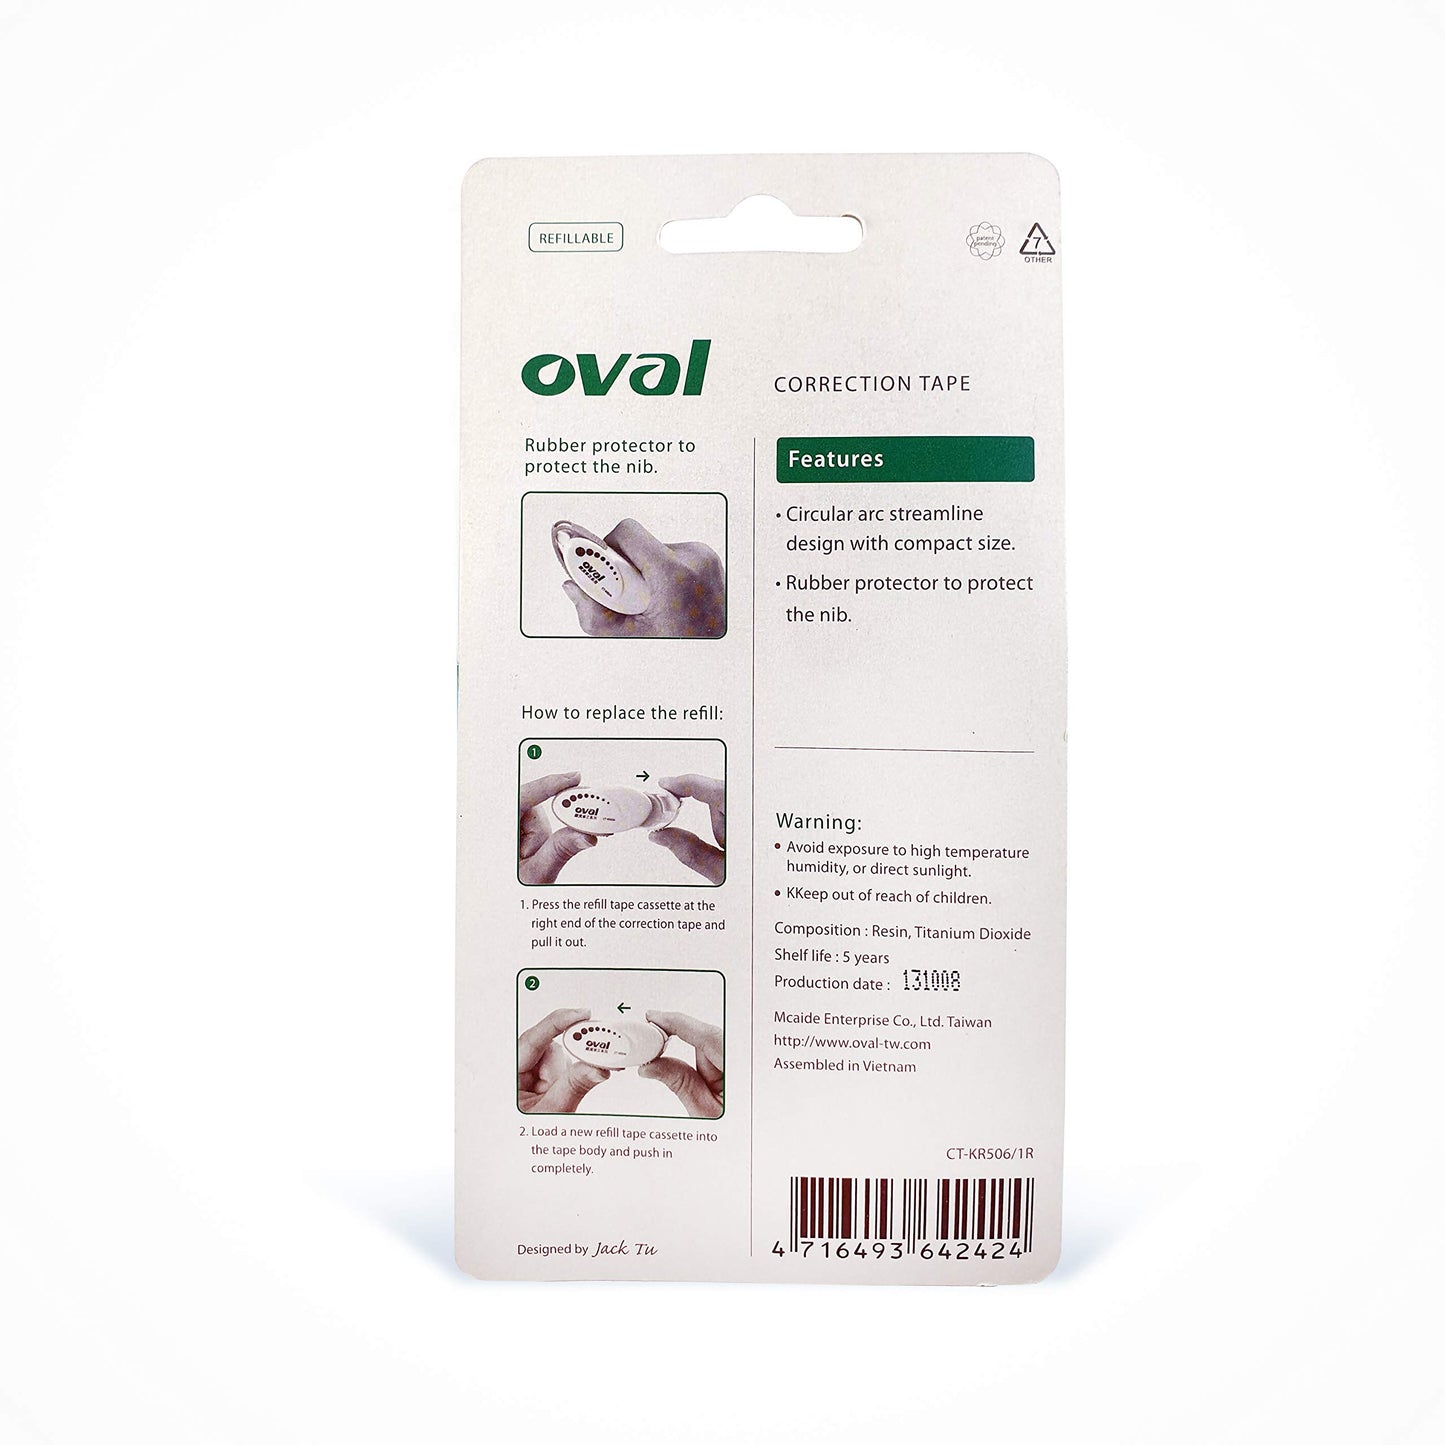 OVALCORRECTION TAPE 5MM X 12M + 1REFILL IN A BLISTER CARD, WHITE, CTKR506/1R